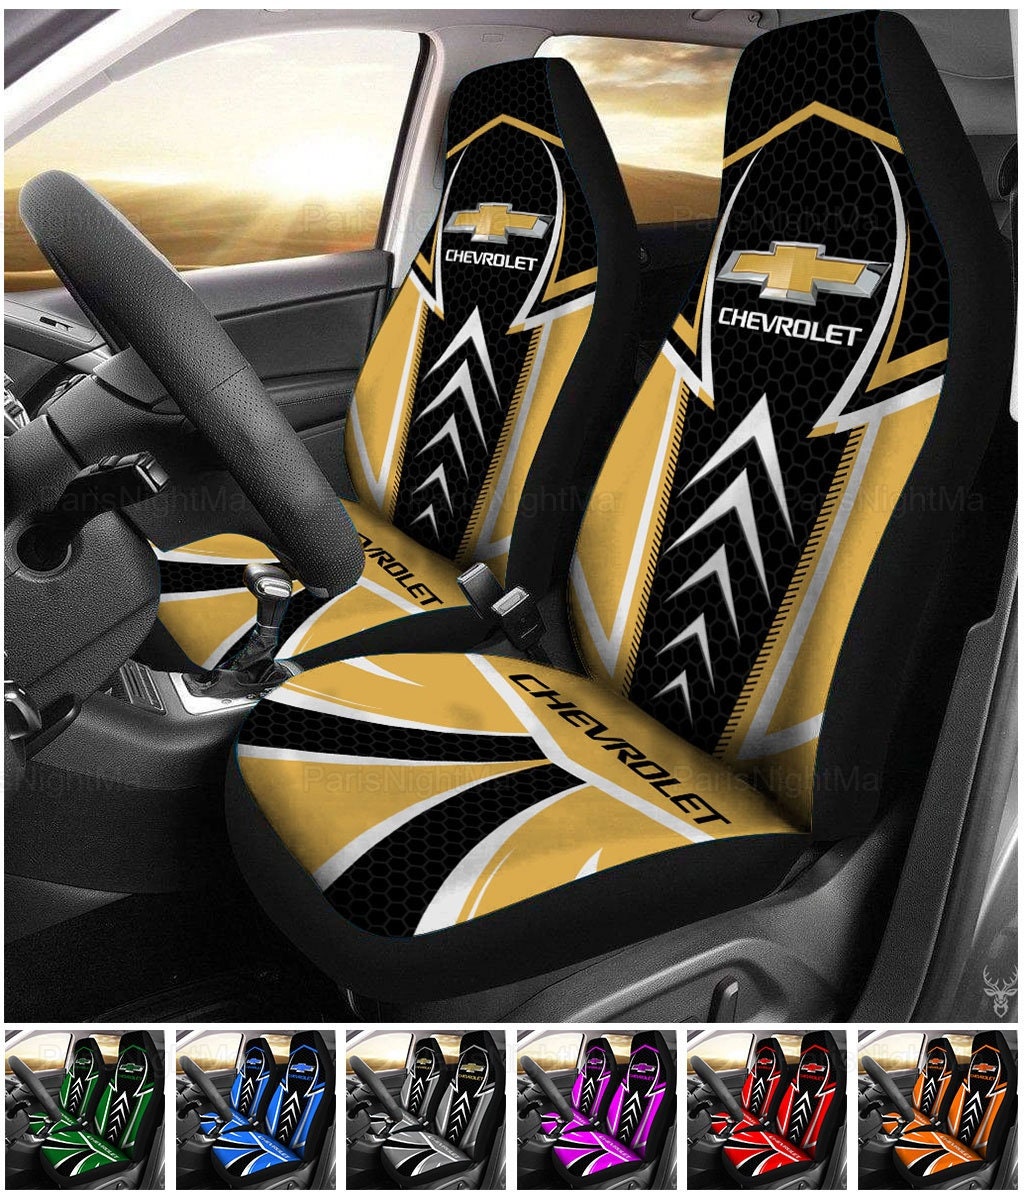 Chevy Seat Covers Etsy Canada